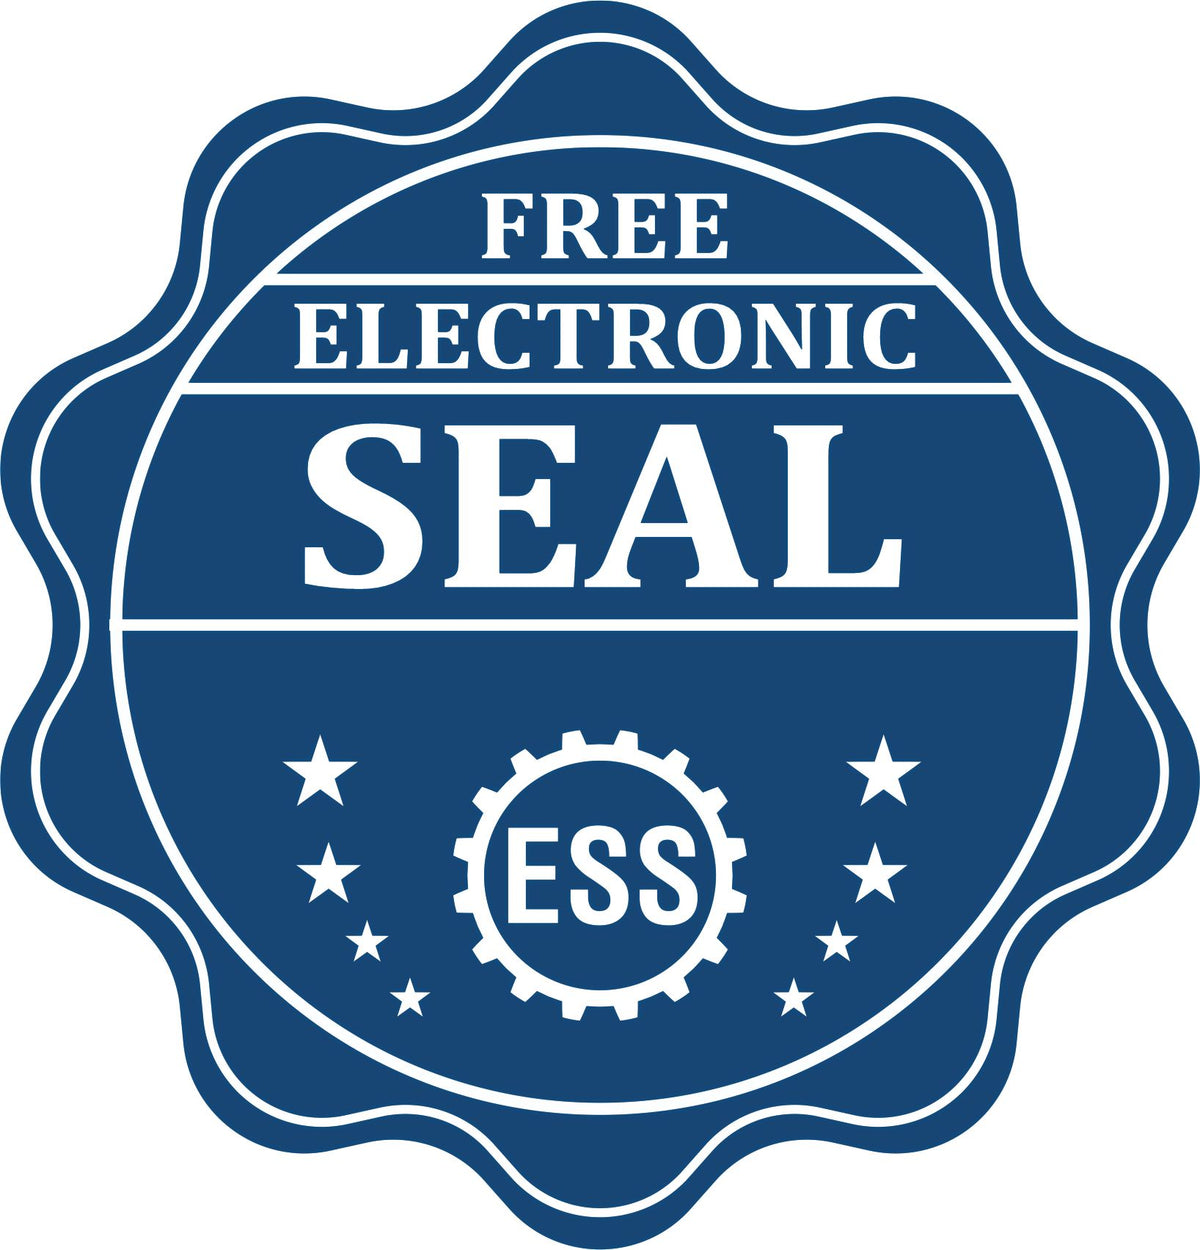 A badge showing a free electronic seal for the State of Arkansas Extended Long Reach Engineer Seal with stars and the ESS gear on the emblem.